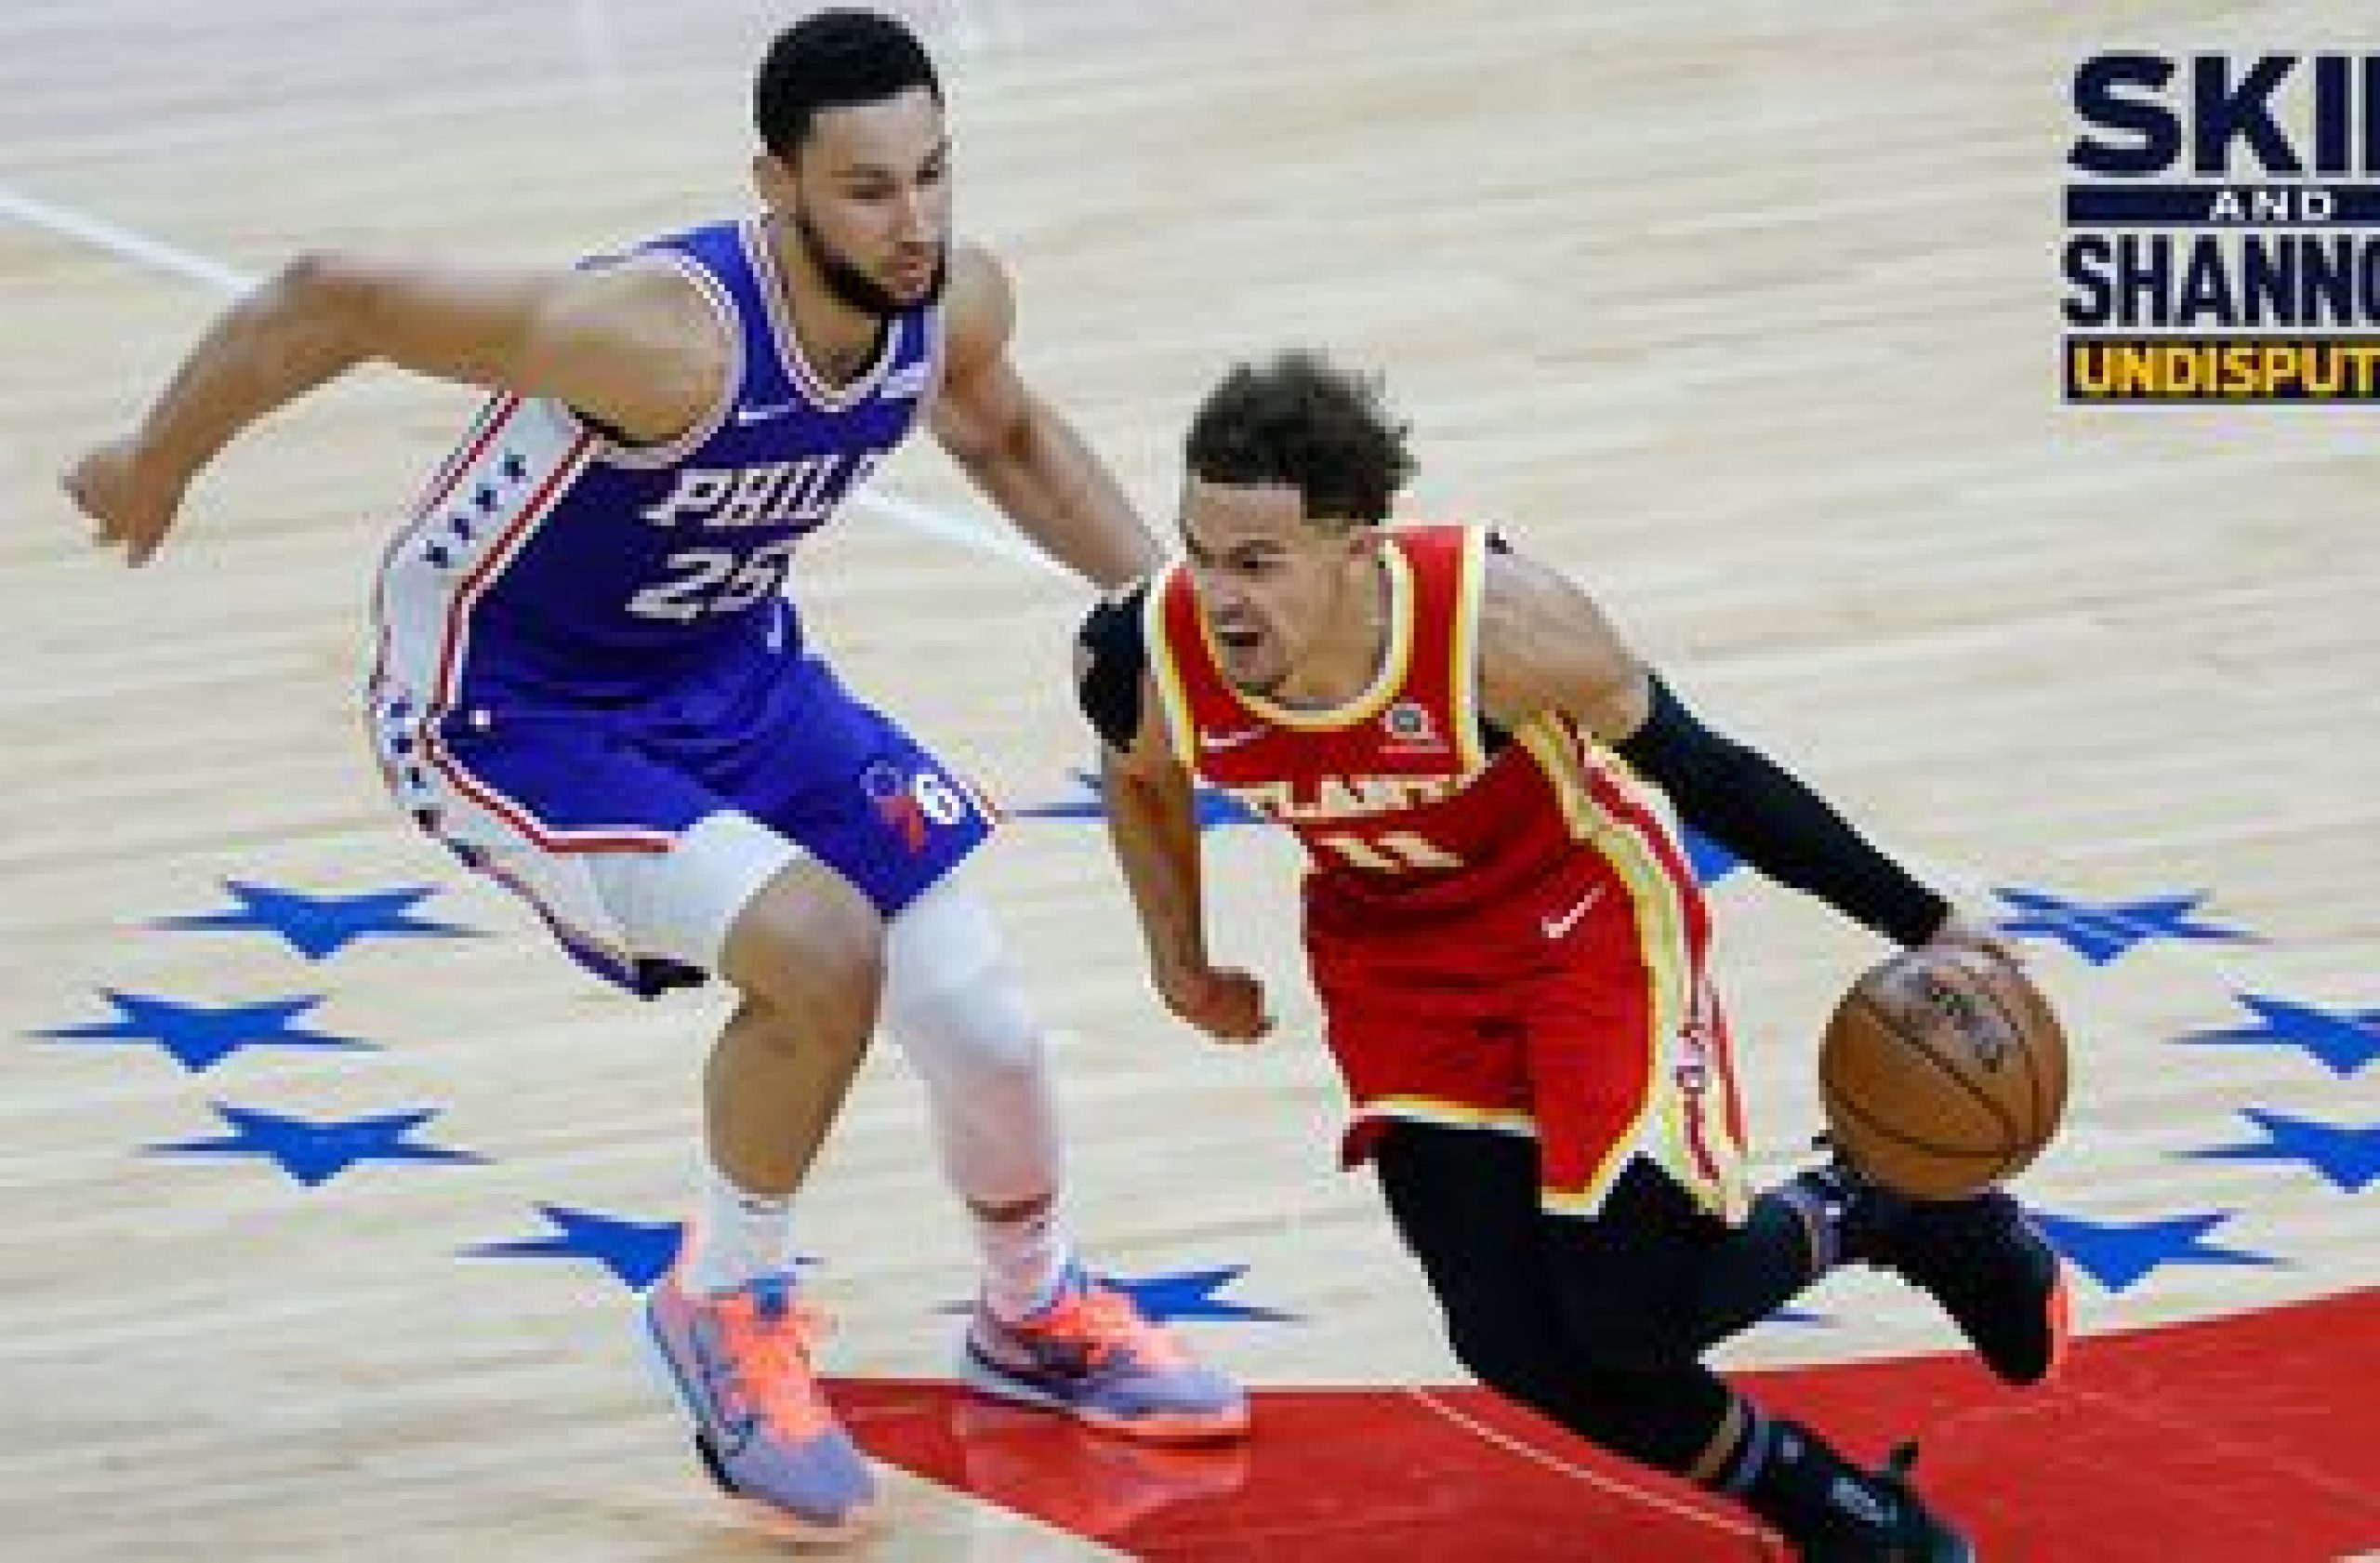 Chris Broussard: Joel Embiid and Tobias Harris will come back stronger to lead the 76ers to a Game 6 win I UNDISPUTED